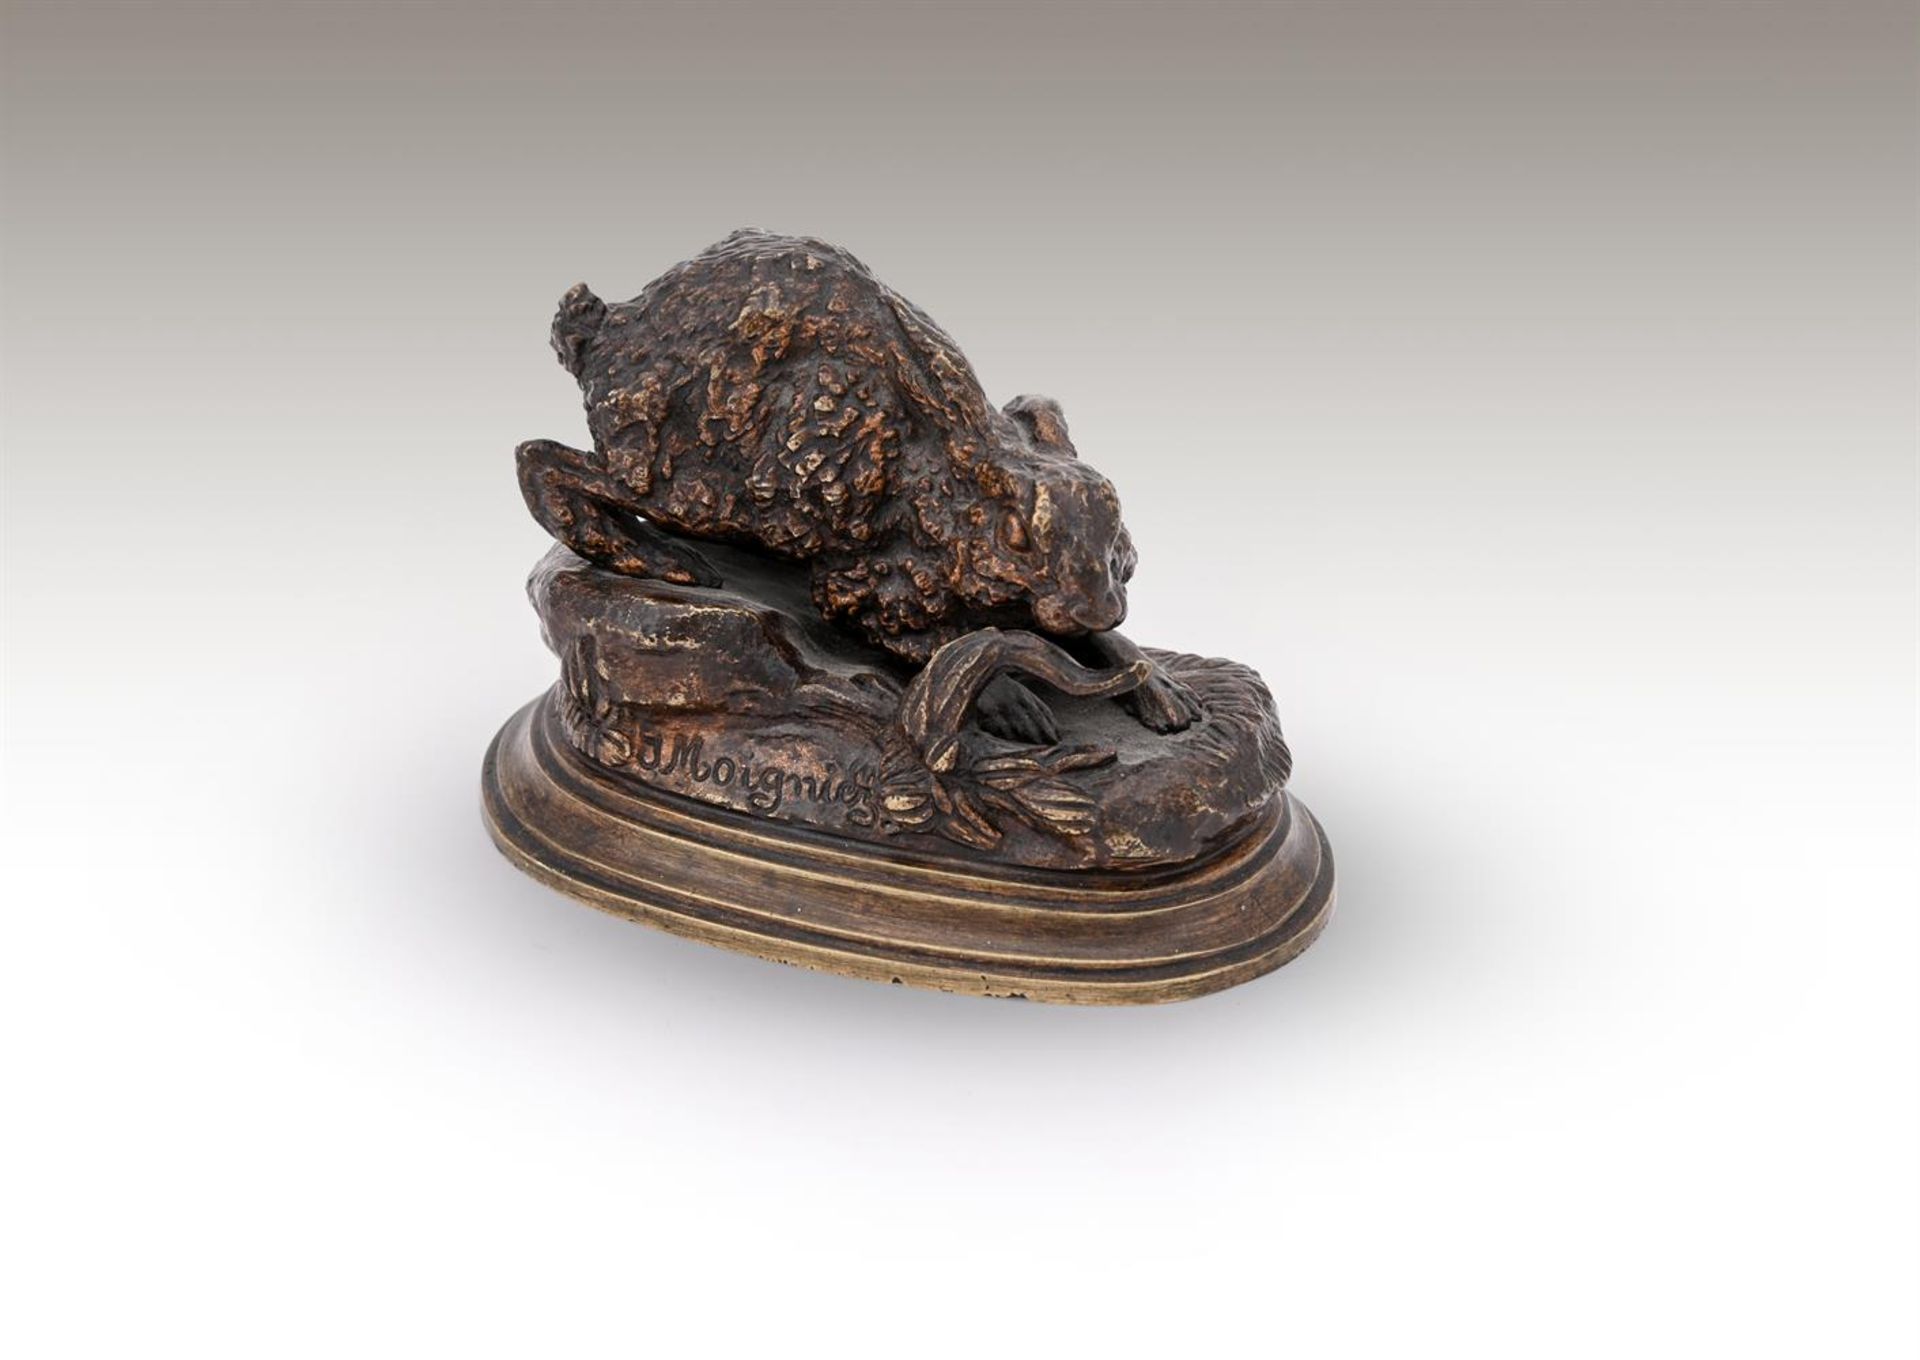 JULES MOIGNIEZ (FRENCH, 1835-1894), A BRONZE MODEL OF A CROUCHING HARE - Image 5 of 5